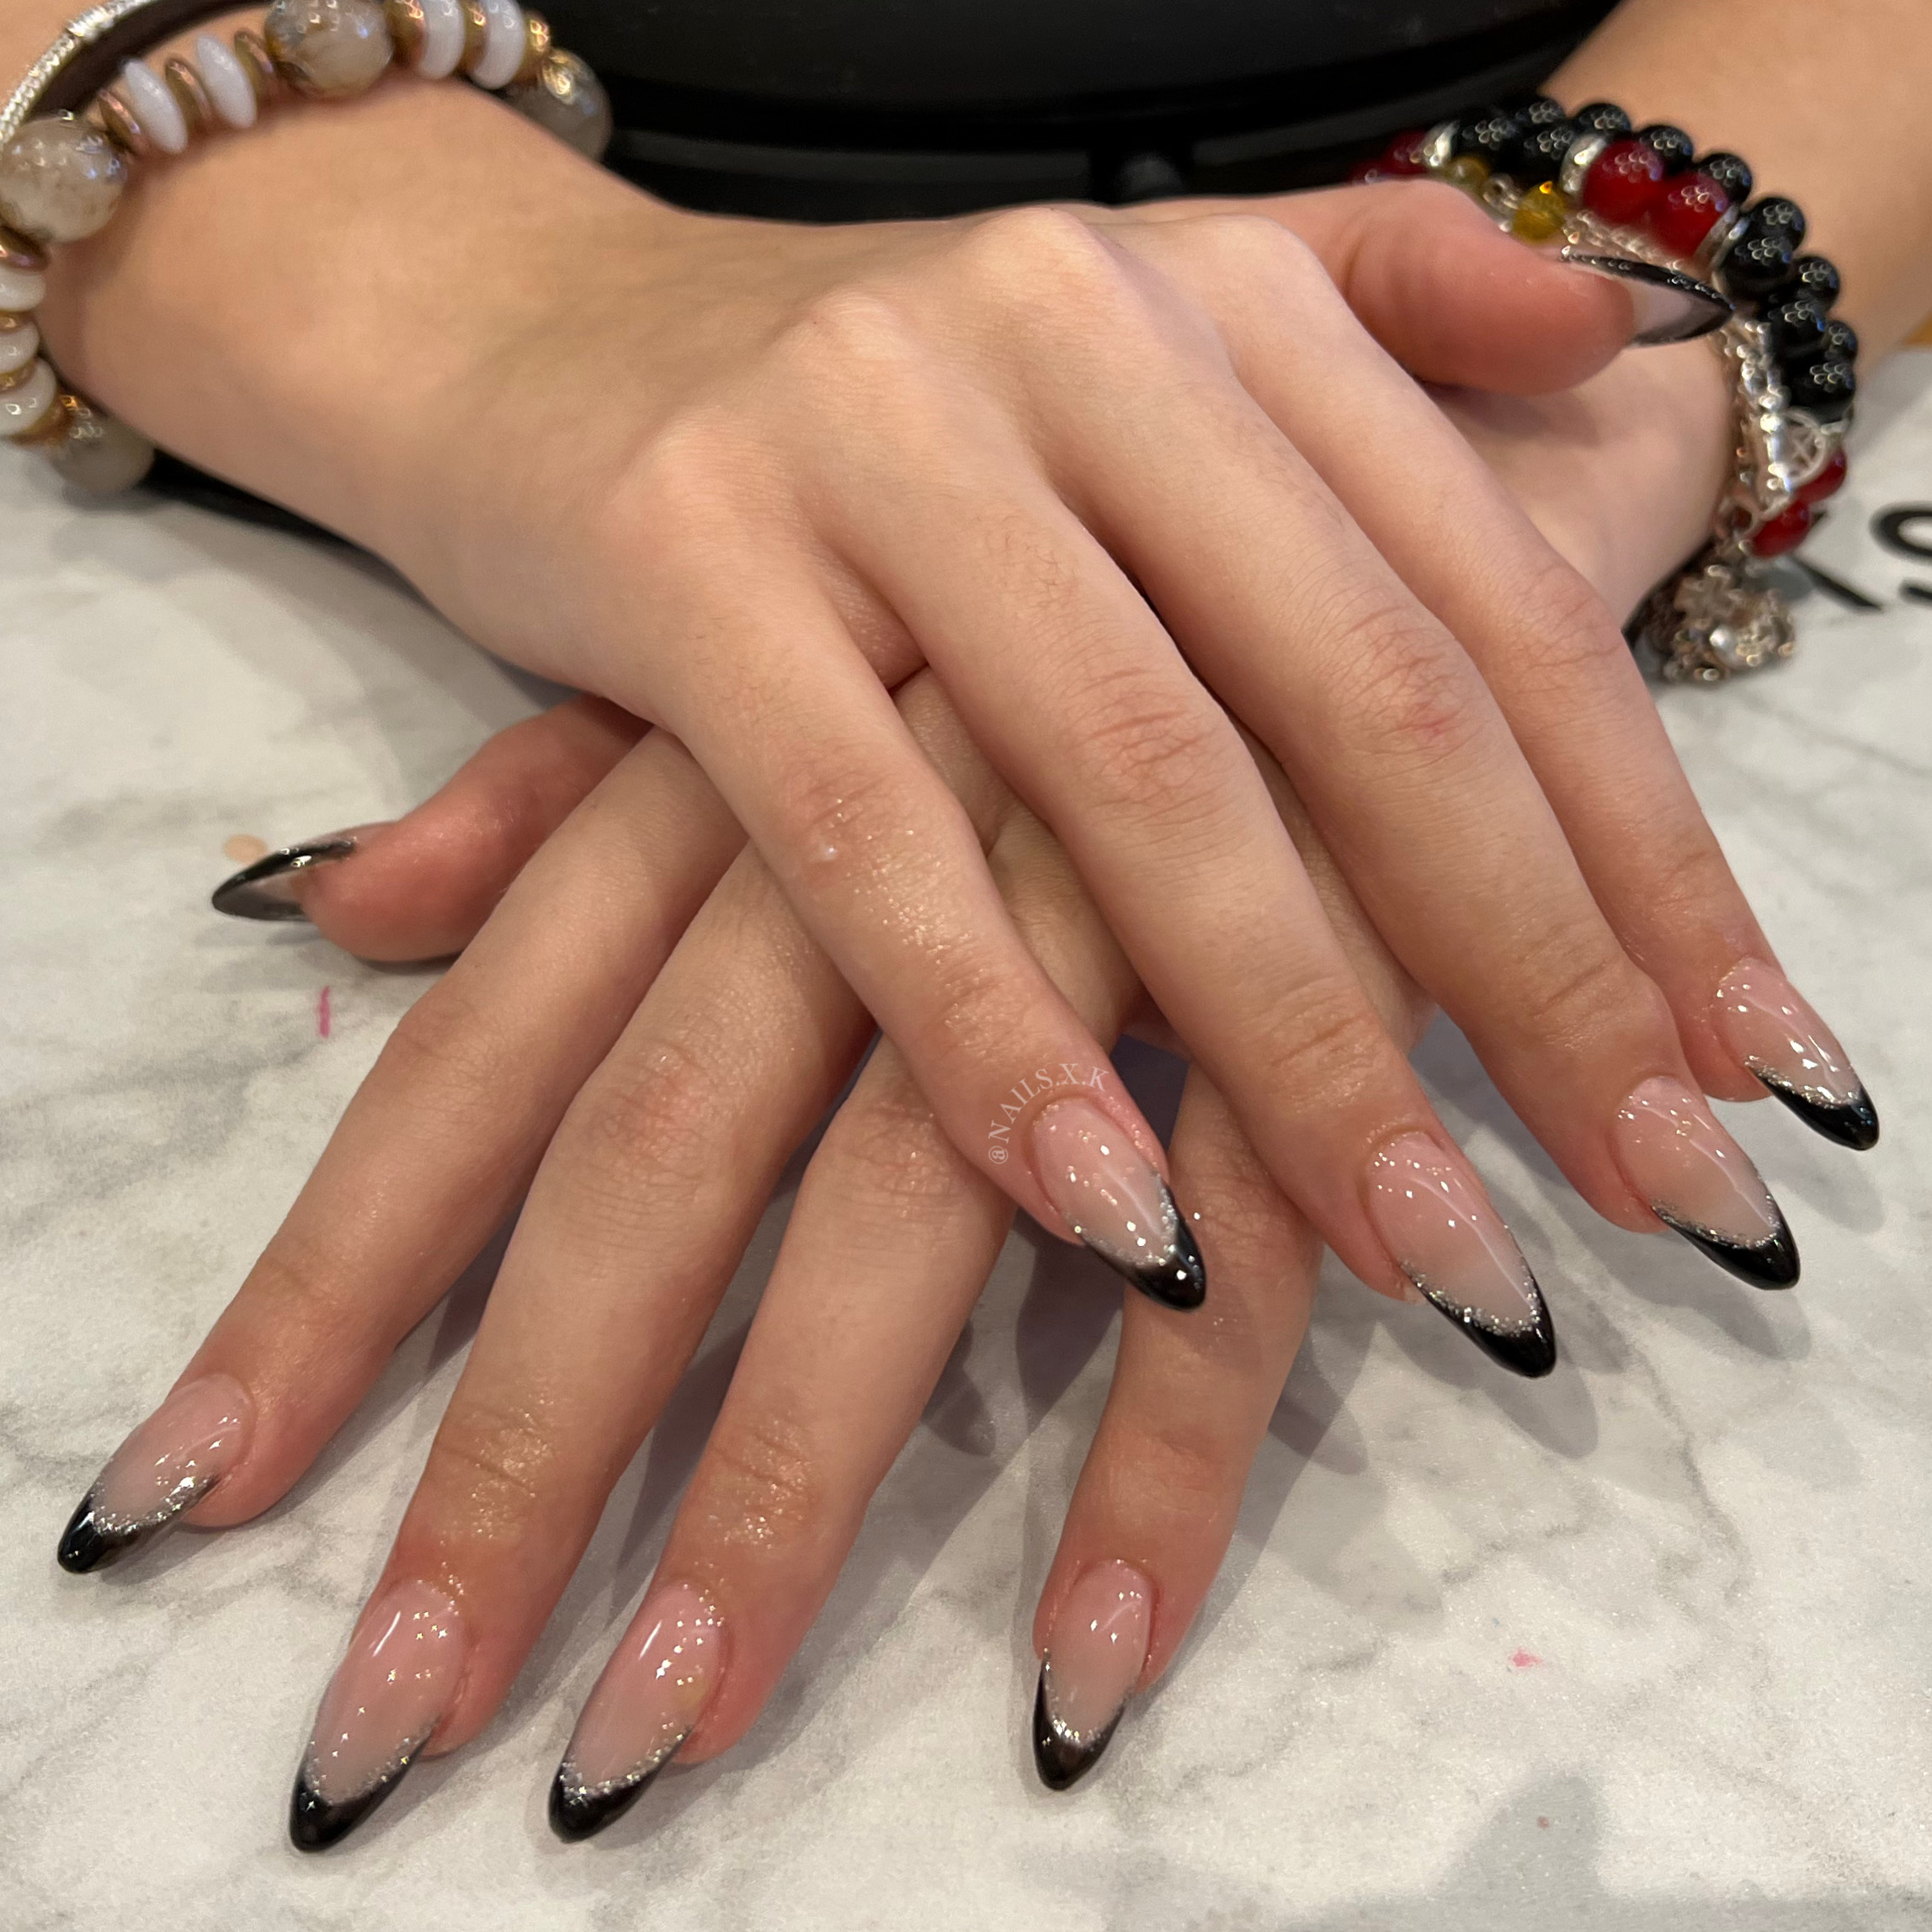 Acrylic full set of nails with black hand painted french tips and silver glitter. Nails by K